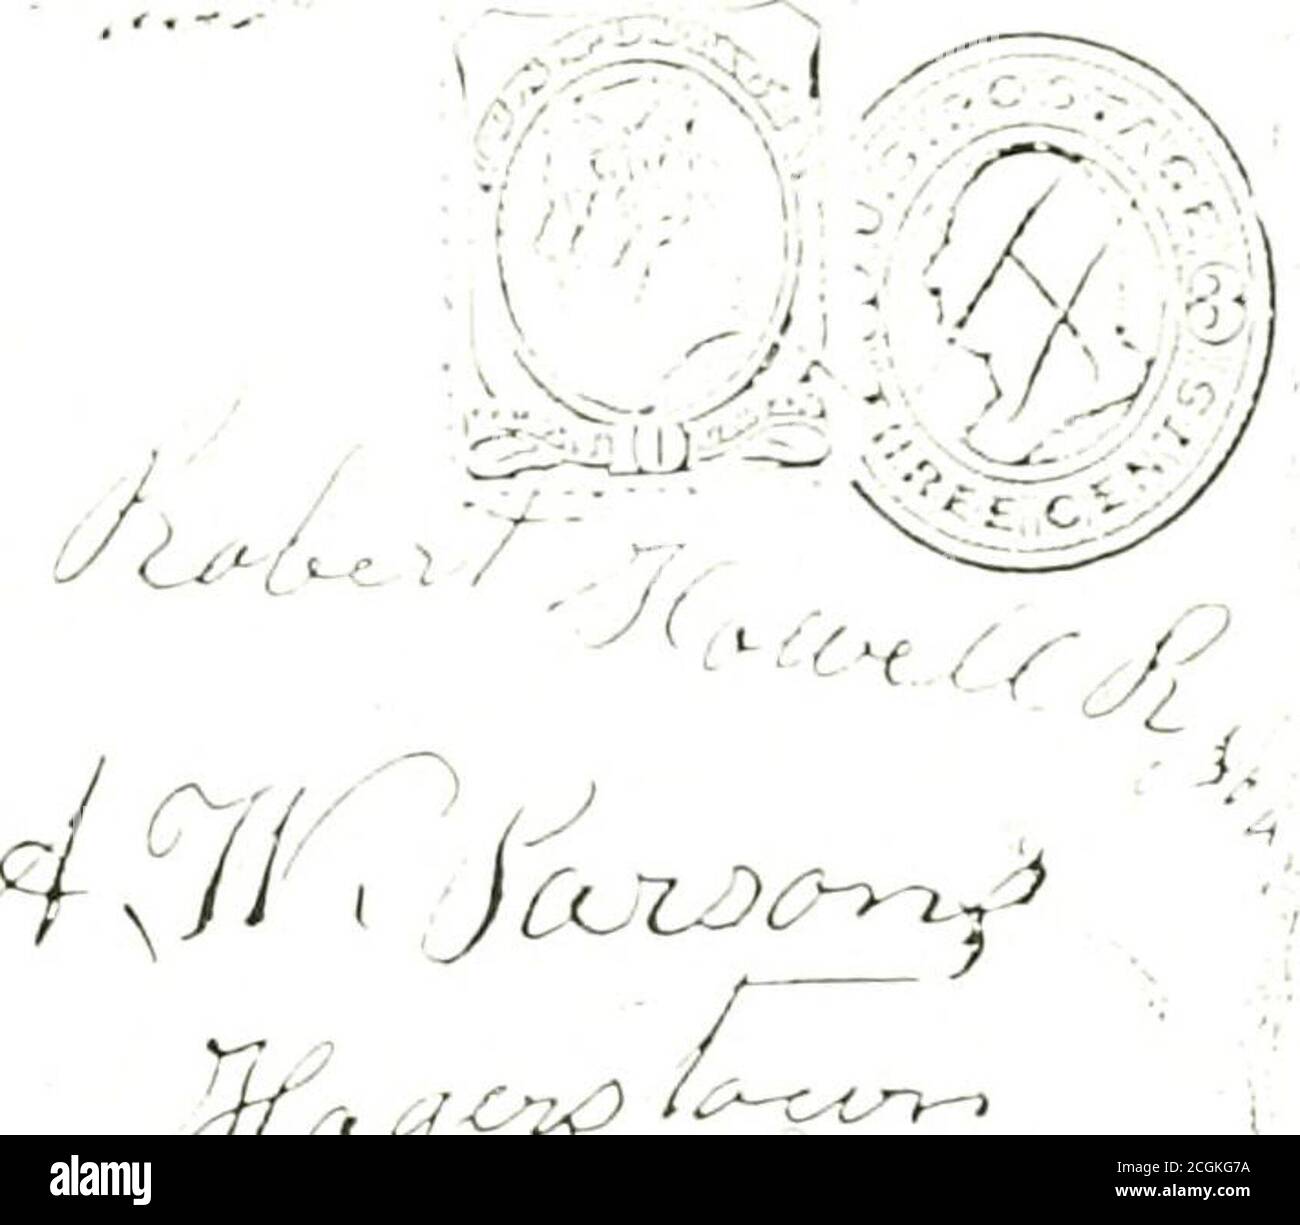 . Parsons family papers, Hagerstown, Indiana, including business letters of A. W. Parsons and a civil war letter of George W. Parsons about Andersonville prison . a !/ C y^^v-:?/^ ,-c a C-^ JL CyU^) C&gt;. yi^ac^^ ^^- C. Ll^J&gt; a^Cl ■ V v&lt;: w i c(/? /X,c 0.-141 /c^;^C C&gt;/.W y.-Z^^.v.c. L*- ; i 4. &gt;v- /-- C- ^ / f^ &gt;^ Ji^ •/ ;^!ne Cofinty, p Jnsepli G. Lemon. I Sheriff of Waijne County^ Jo«e|&gt;h I- .Smith.  , , j Stock Photo